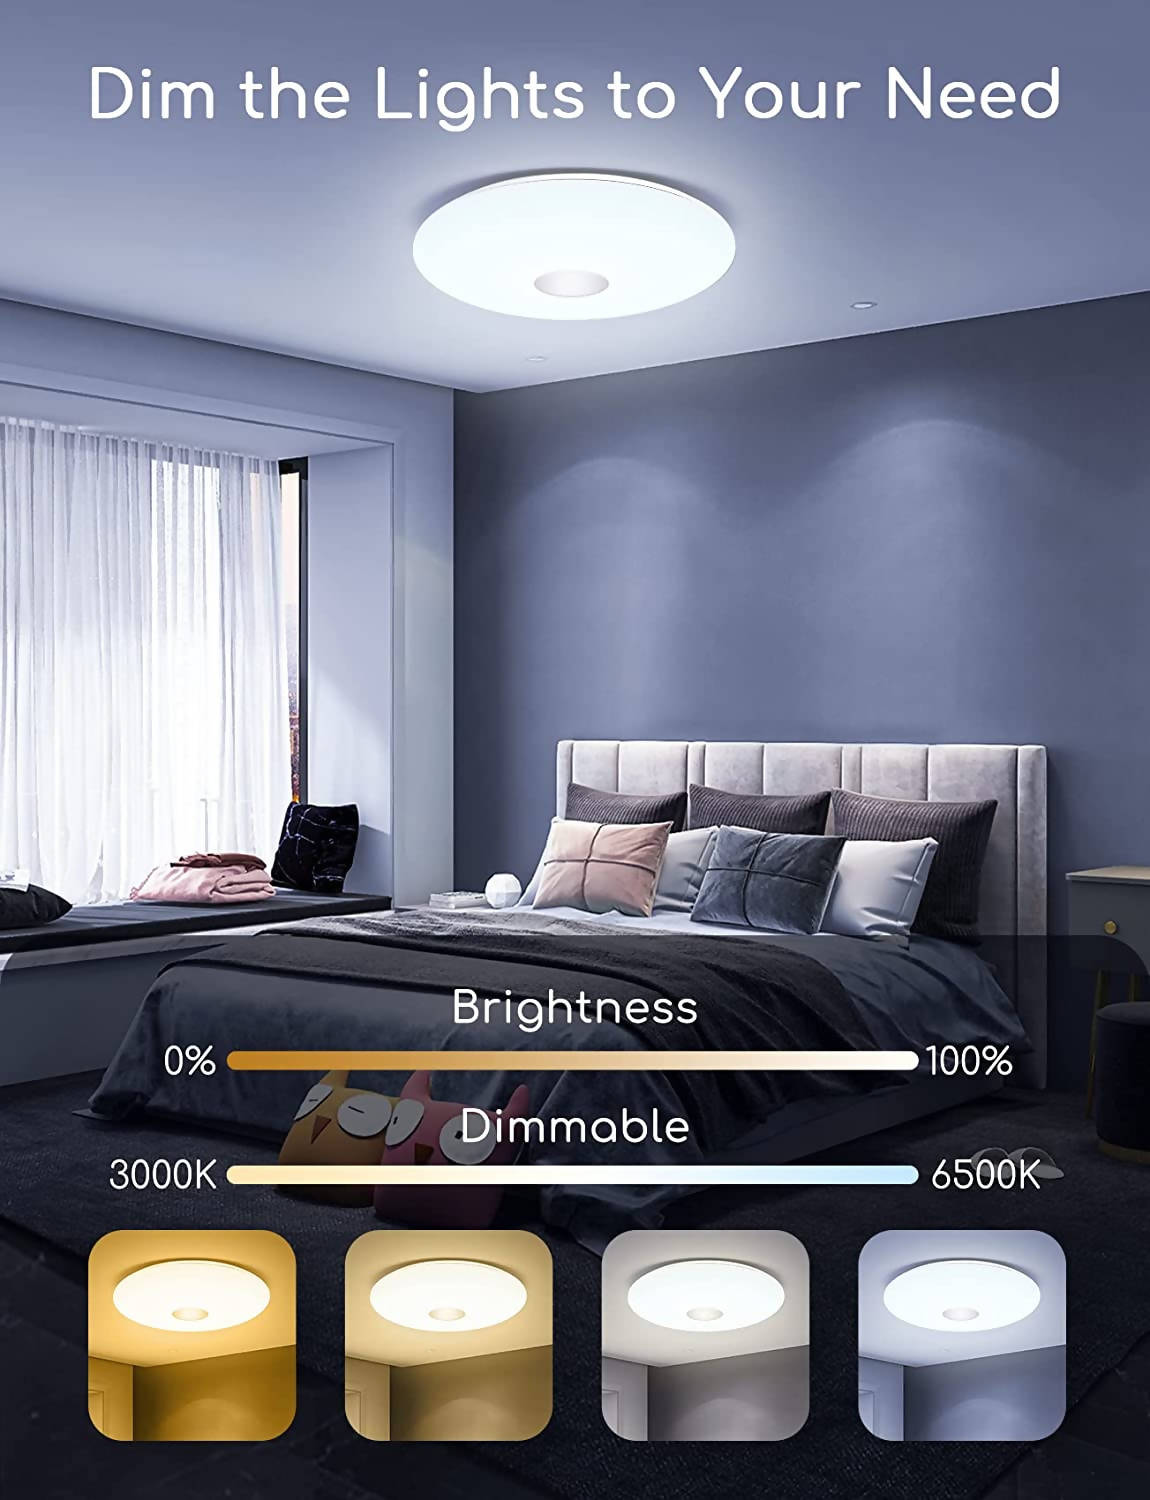 Aigostar LED Ceiling Light Dimmable 18 W, Smart LED Ceiling Light, WiFi App or Voice Control, Compatible with Alexa and Google Home, 1300 lm, 3000 K - 6500 K (Equivalent Bulb 75 W)